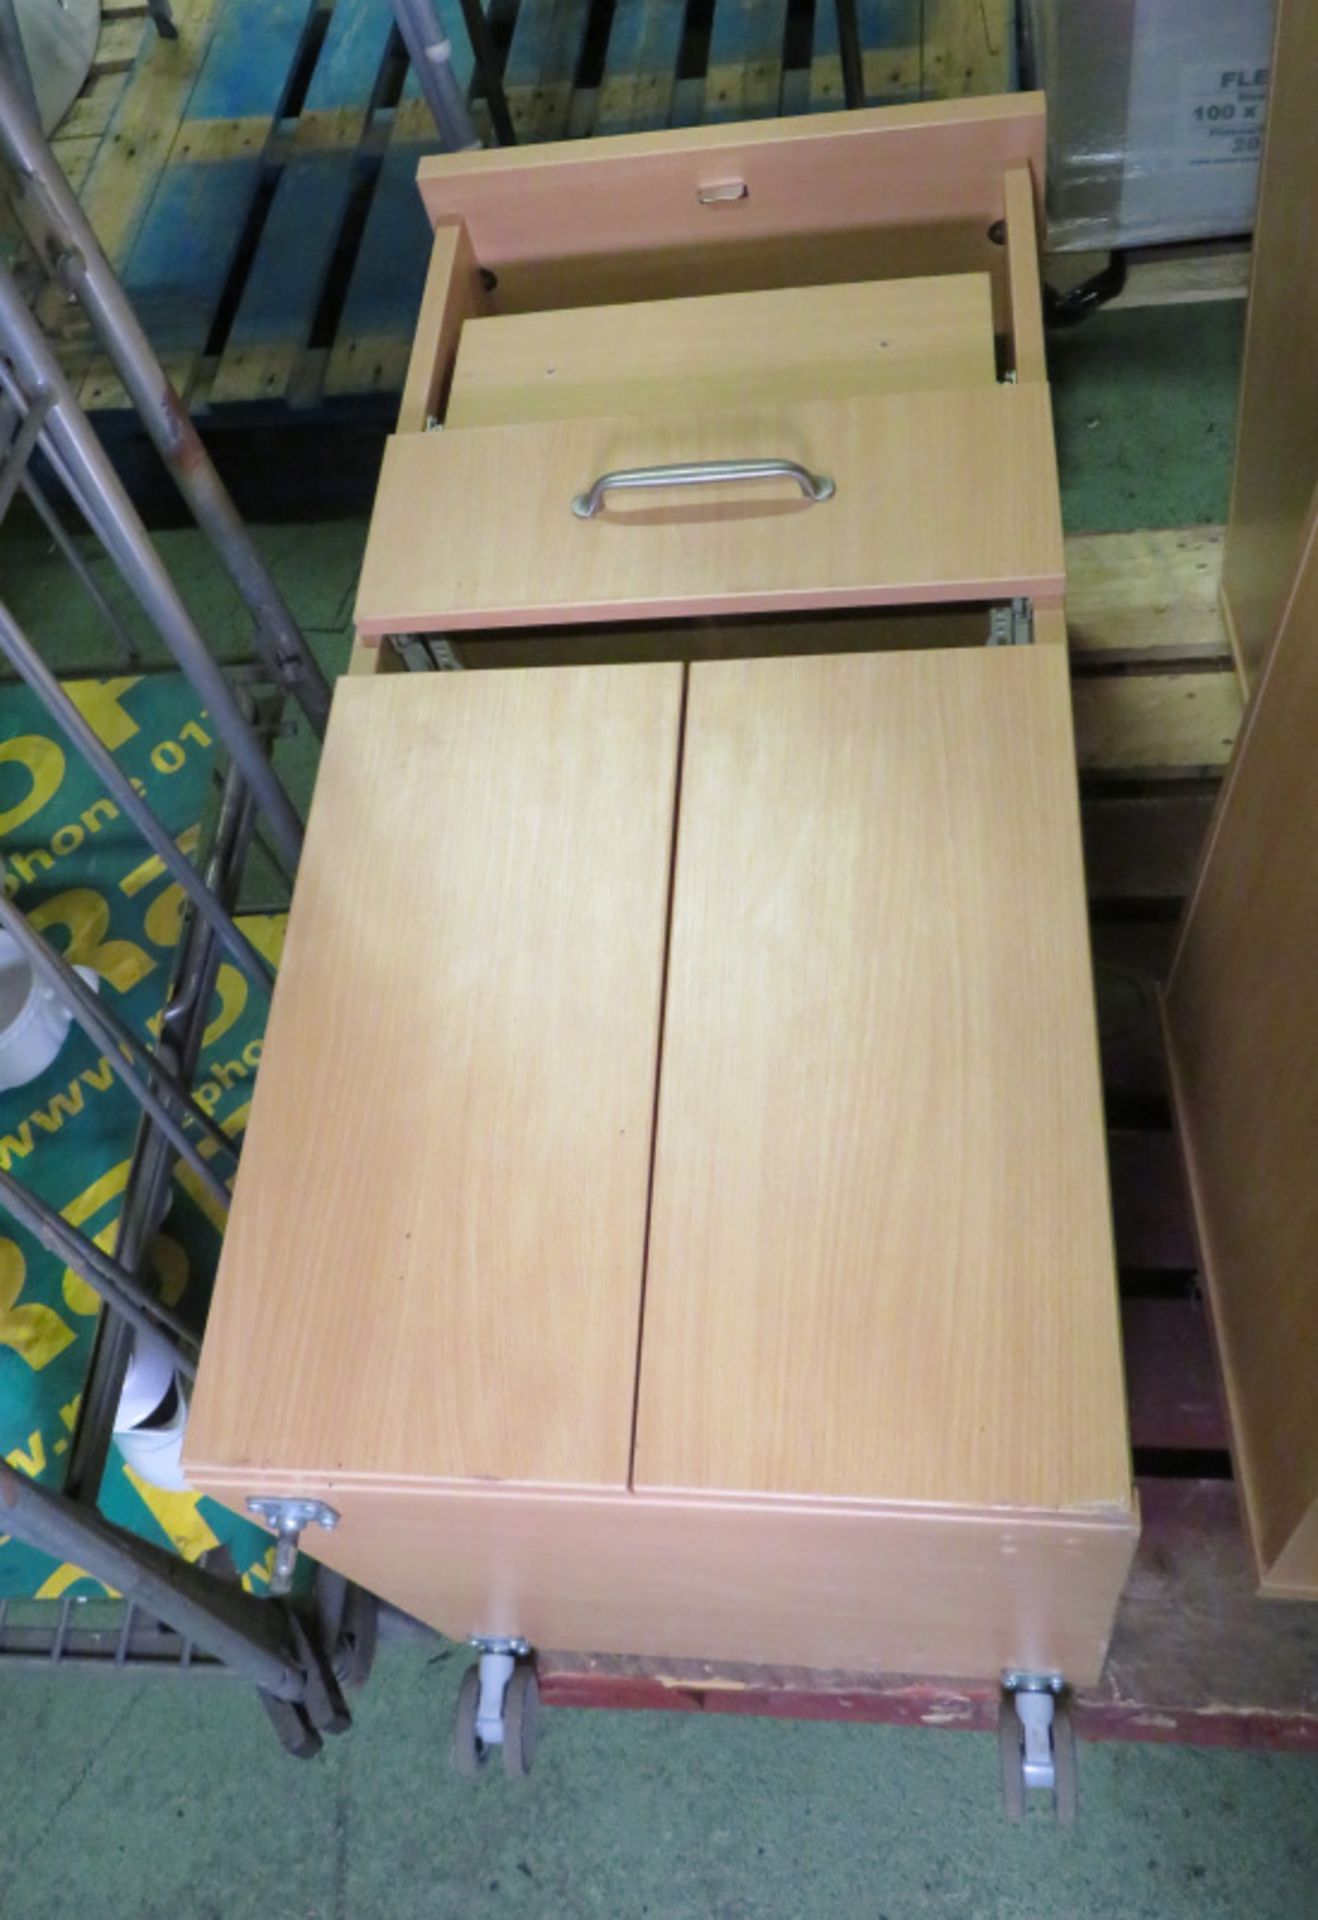 3x Bed Side Cabinets - W 450mm x D 550mm x H 980mm - missing castors - Image 2 of 5